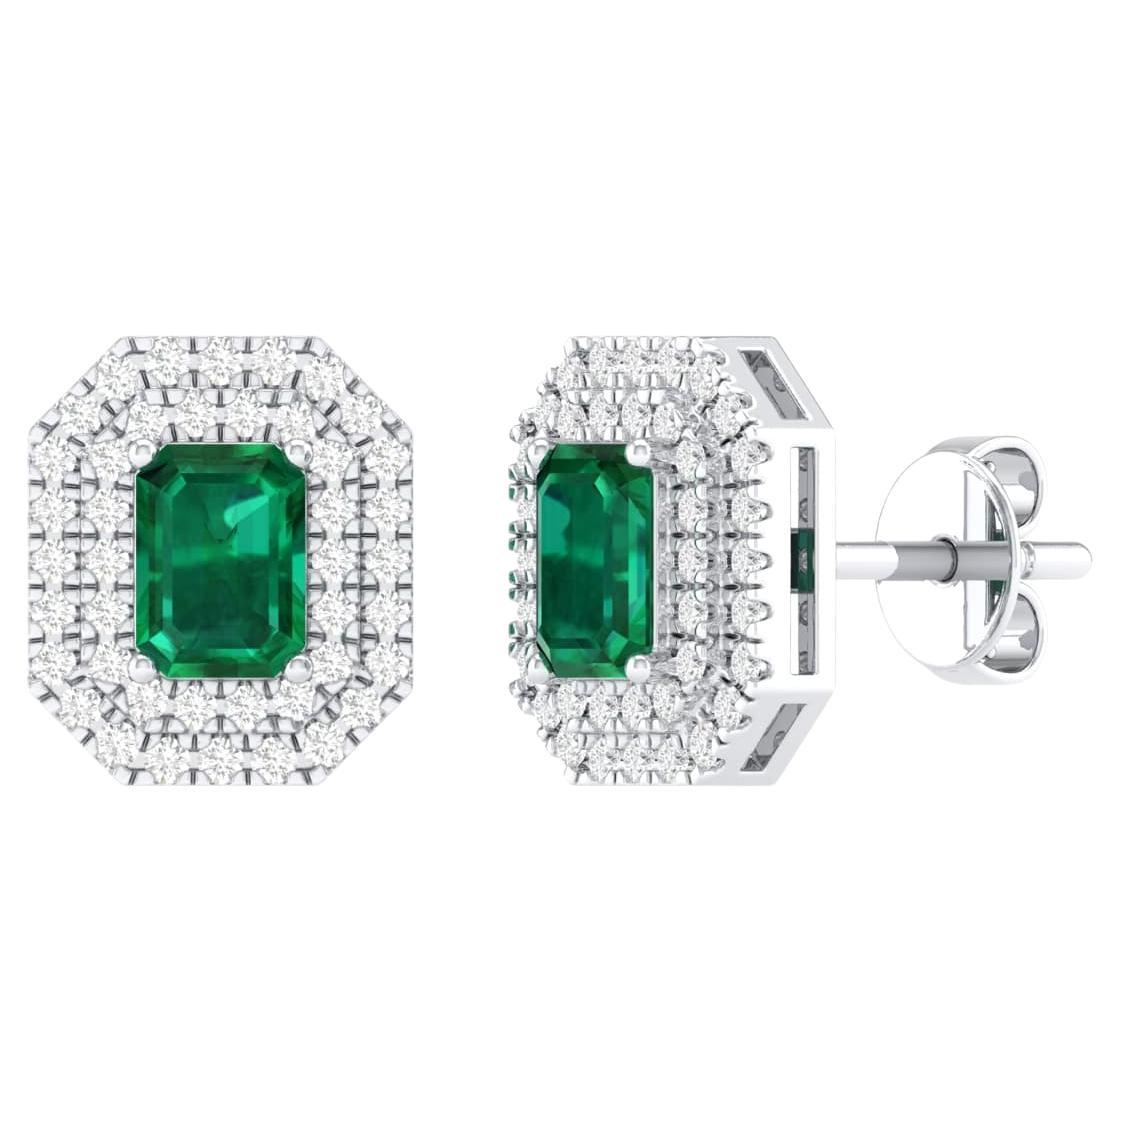 18 Karat White Gold 1.26 Carat Emerald Solitaire Stud Earrings For Sale